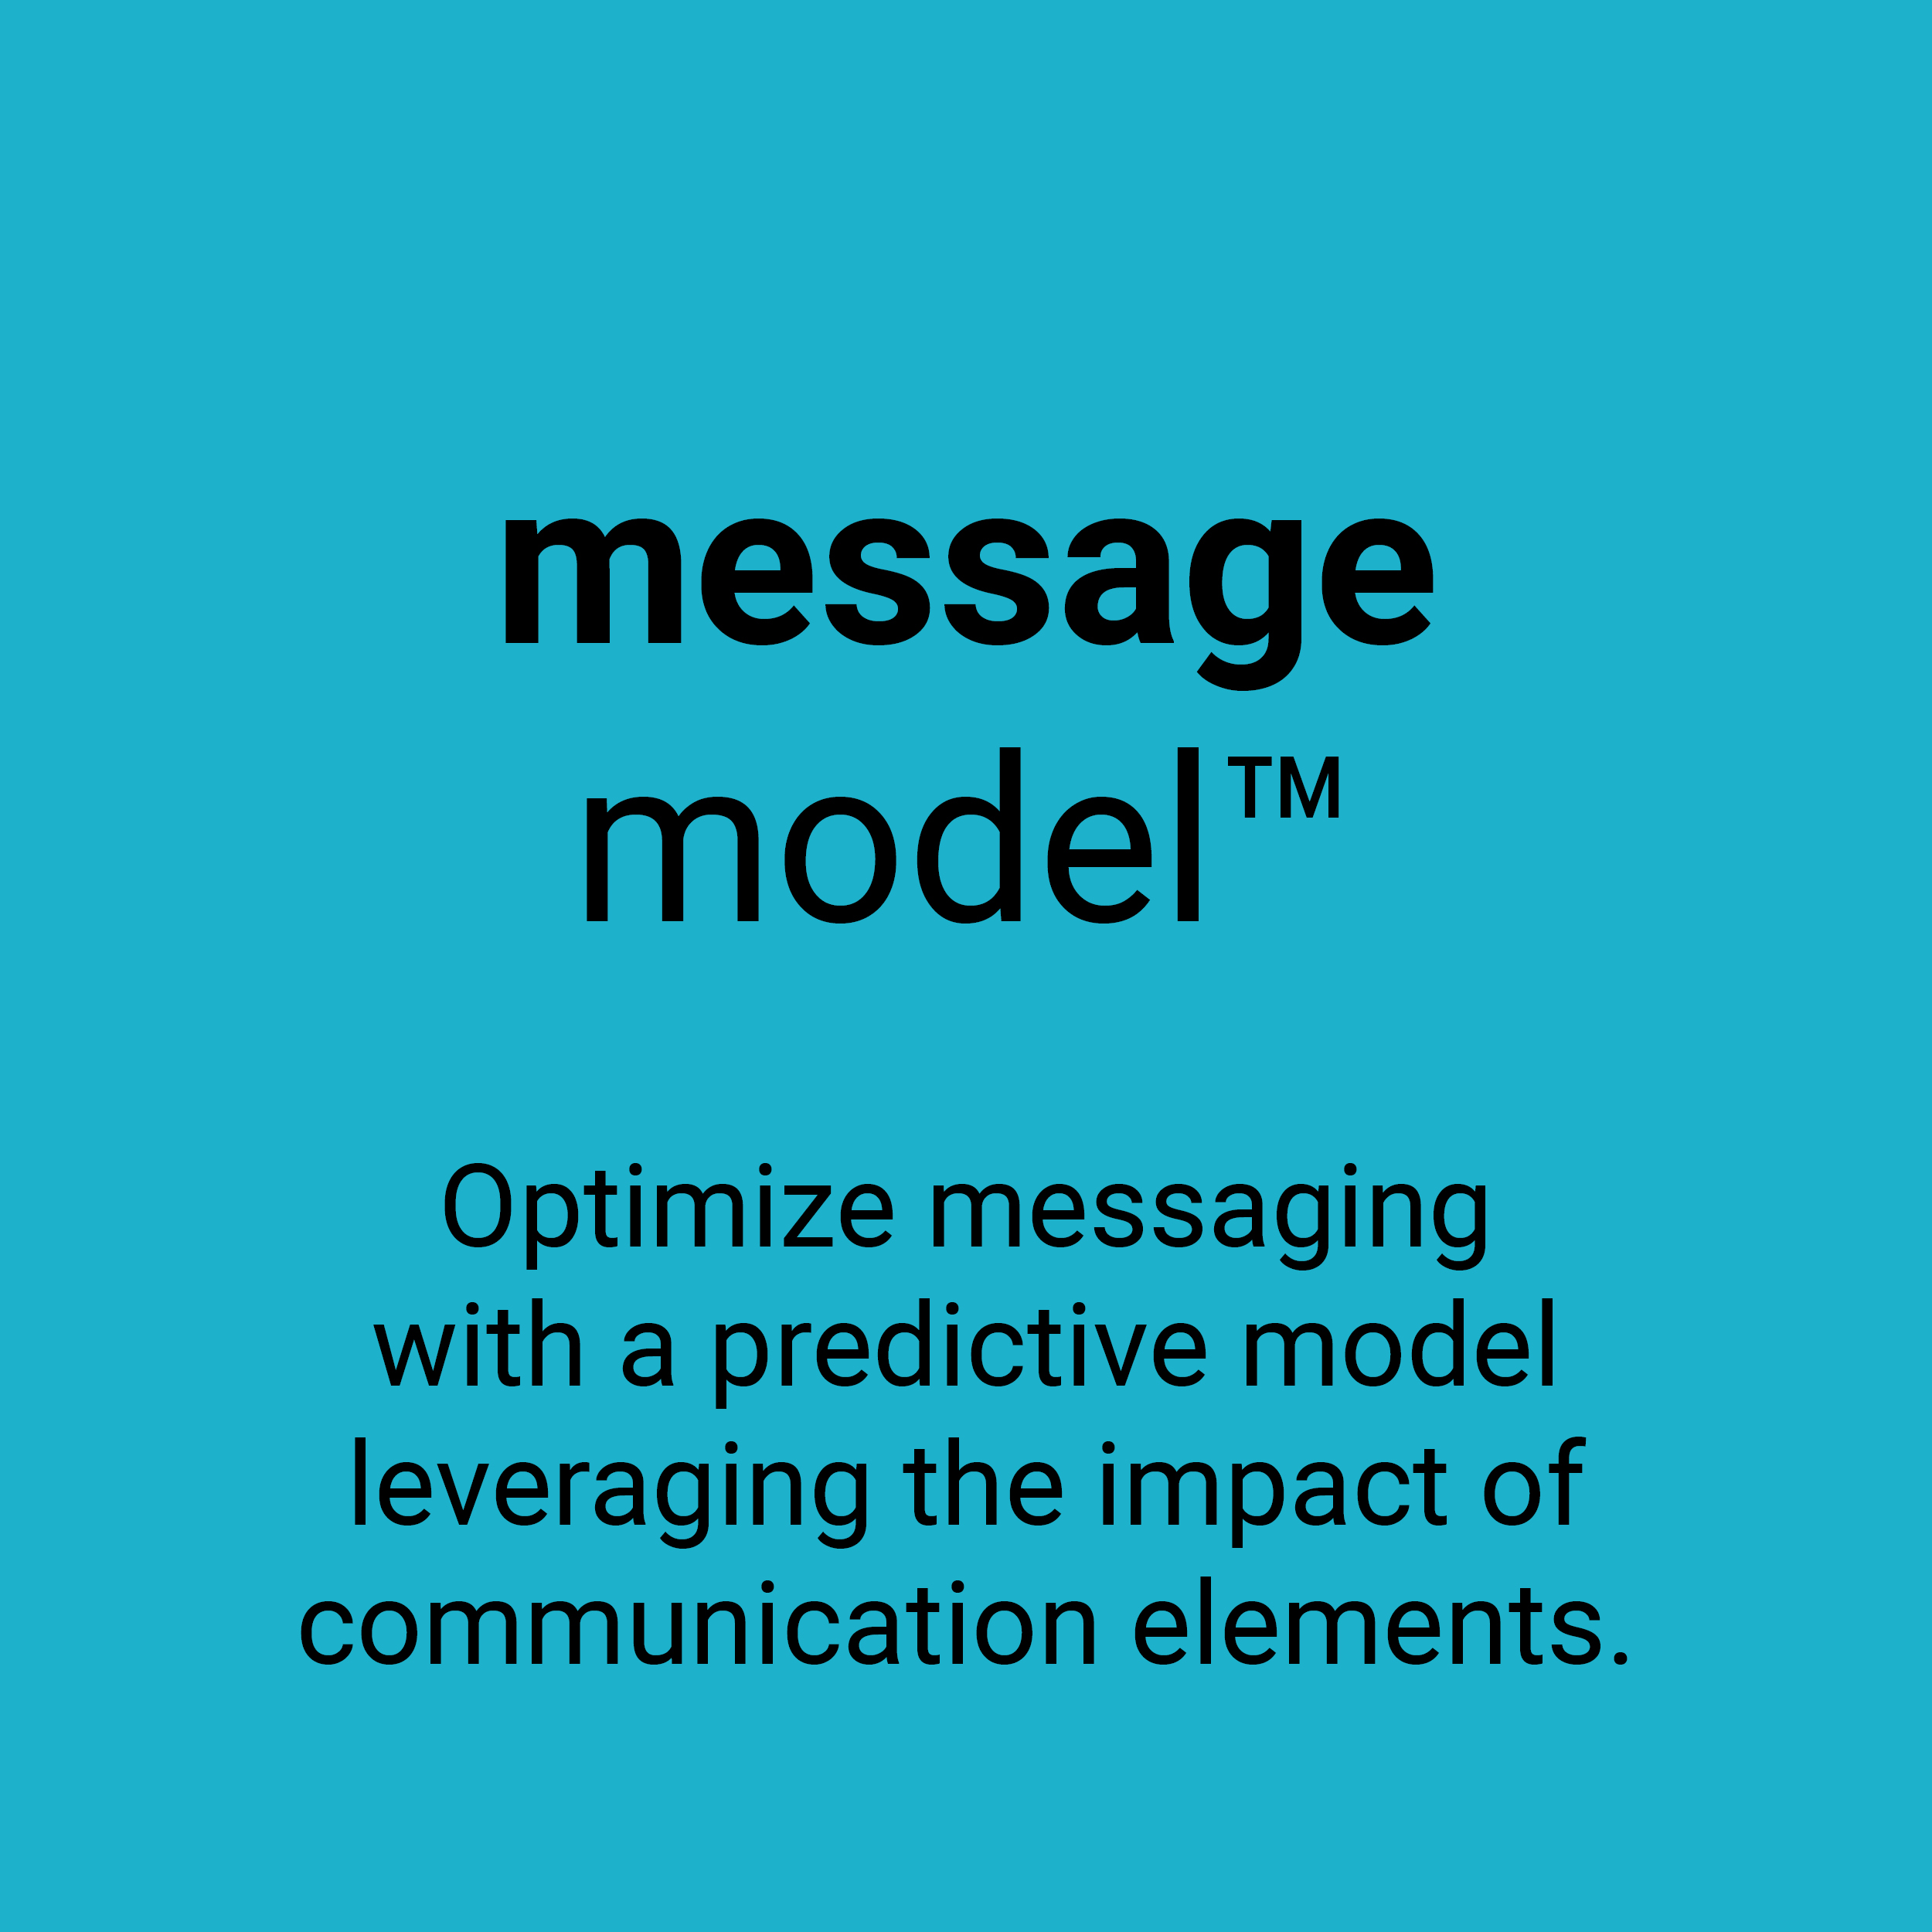 Message Model TM. Optimize messaging with a predictive model leveraging the impact of communication elements.